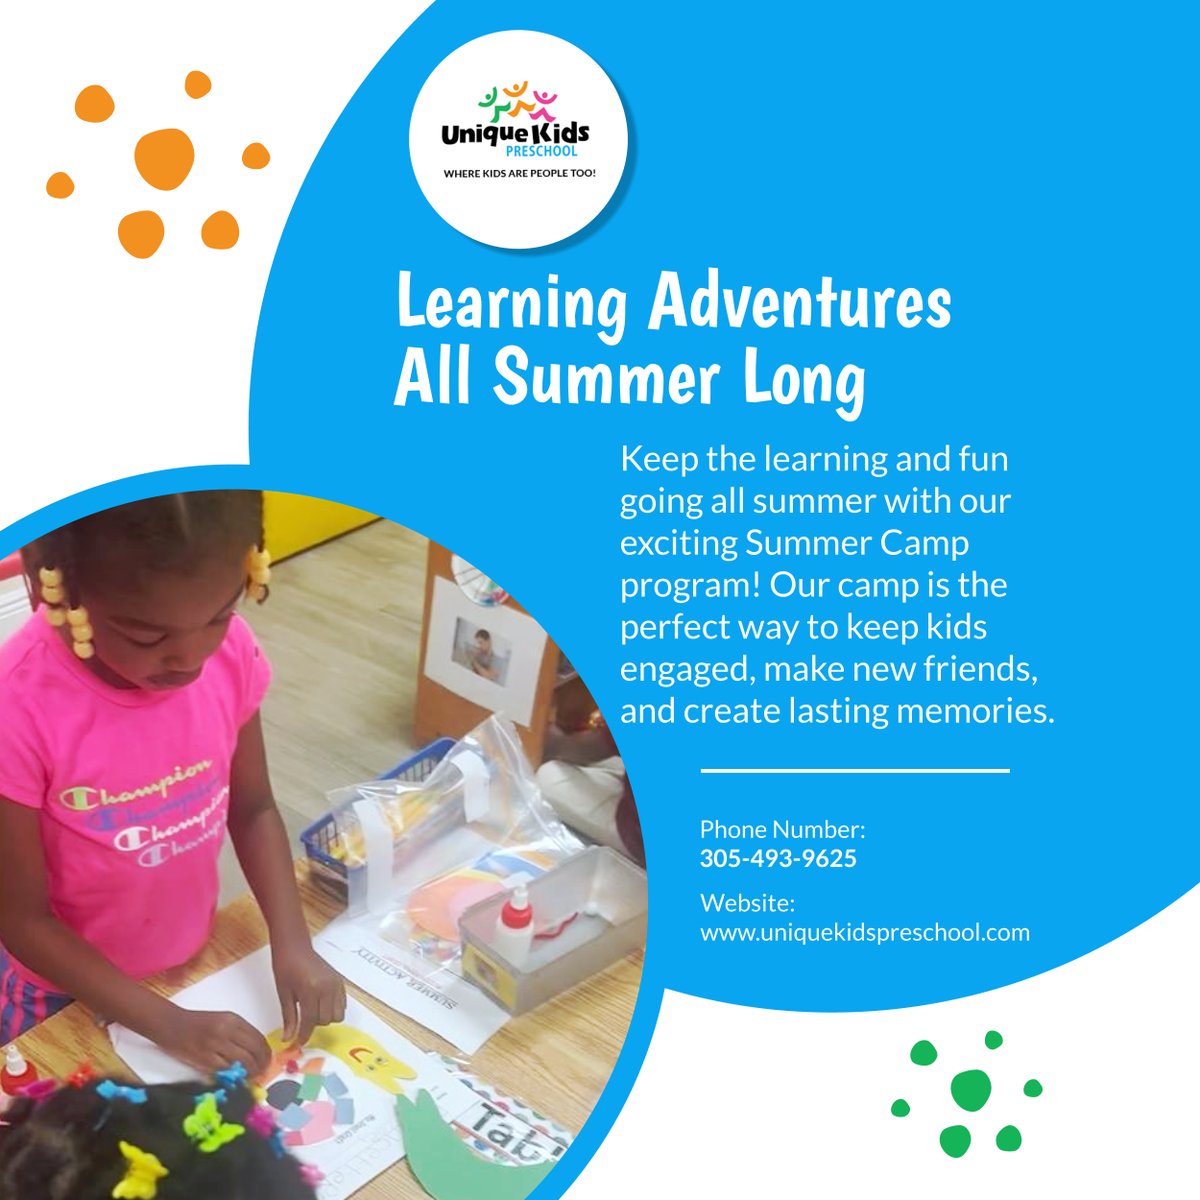 Make this summer unforgettable! 

Discover the magic of our Summer Camp and register your child today! 

#instafollow #Earlychildhoodeducation #Miami #Education #Children #Preschool #MiamiGardensFL #SummerCamp